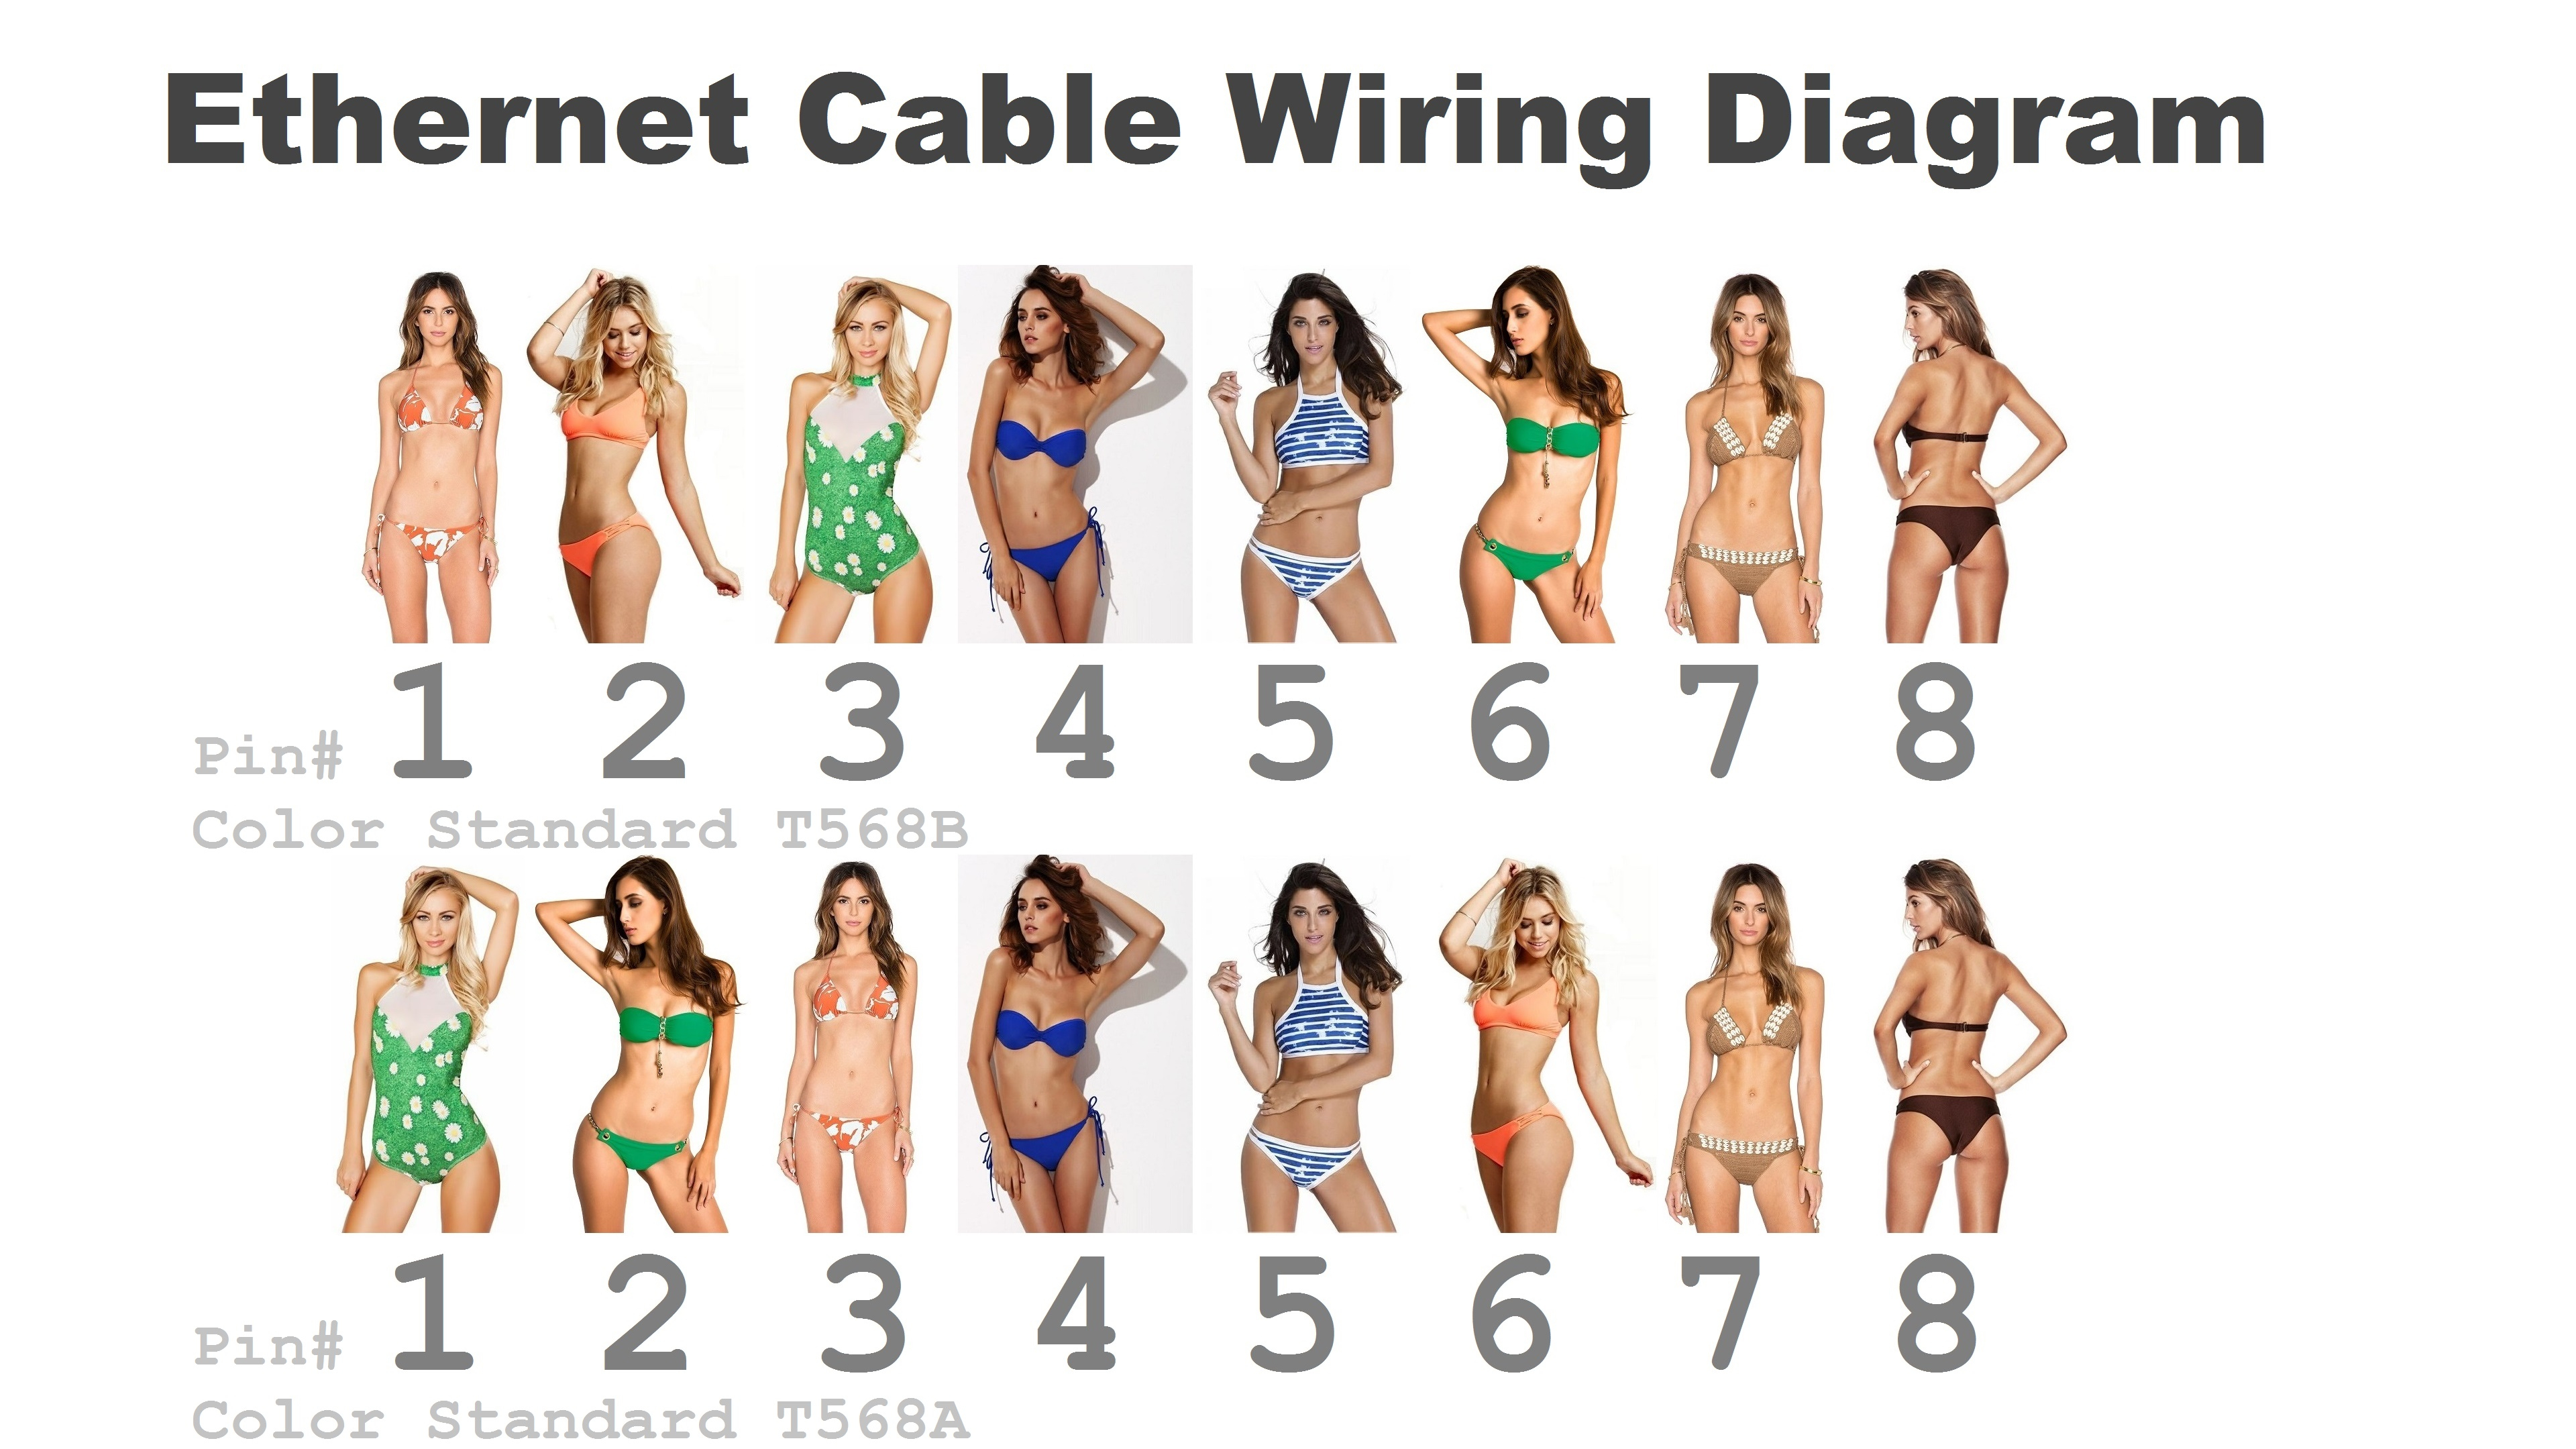 Ethernet Cable Wiring Diagram - Album On Imgur - Ethernet Cable Wiring Diagram